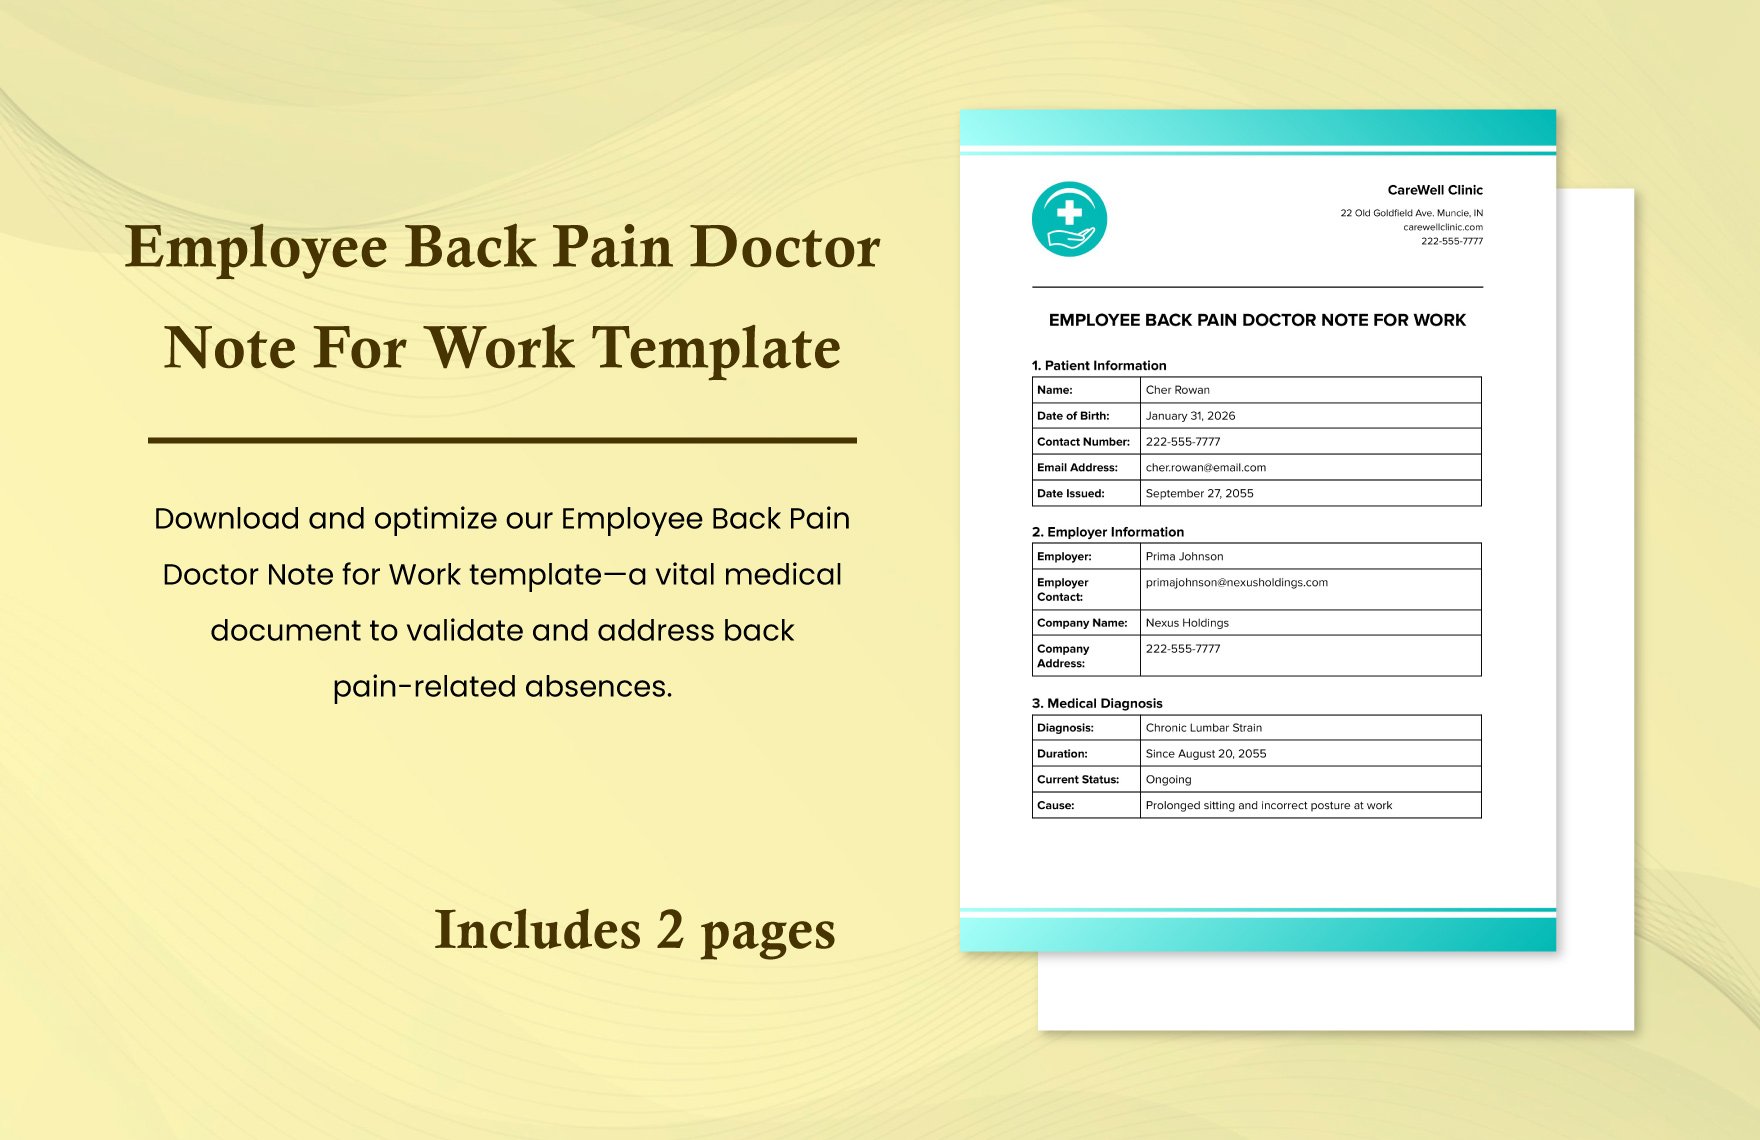 Employee Back Pain Doctor Note for Work Template